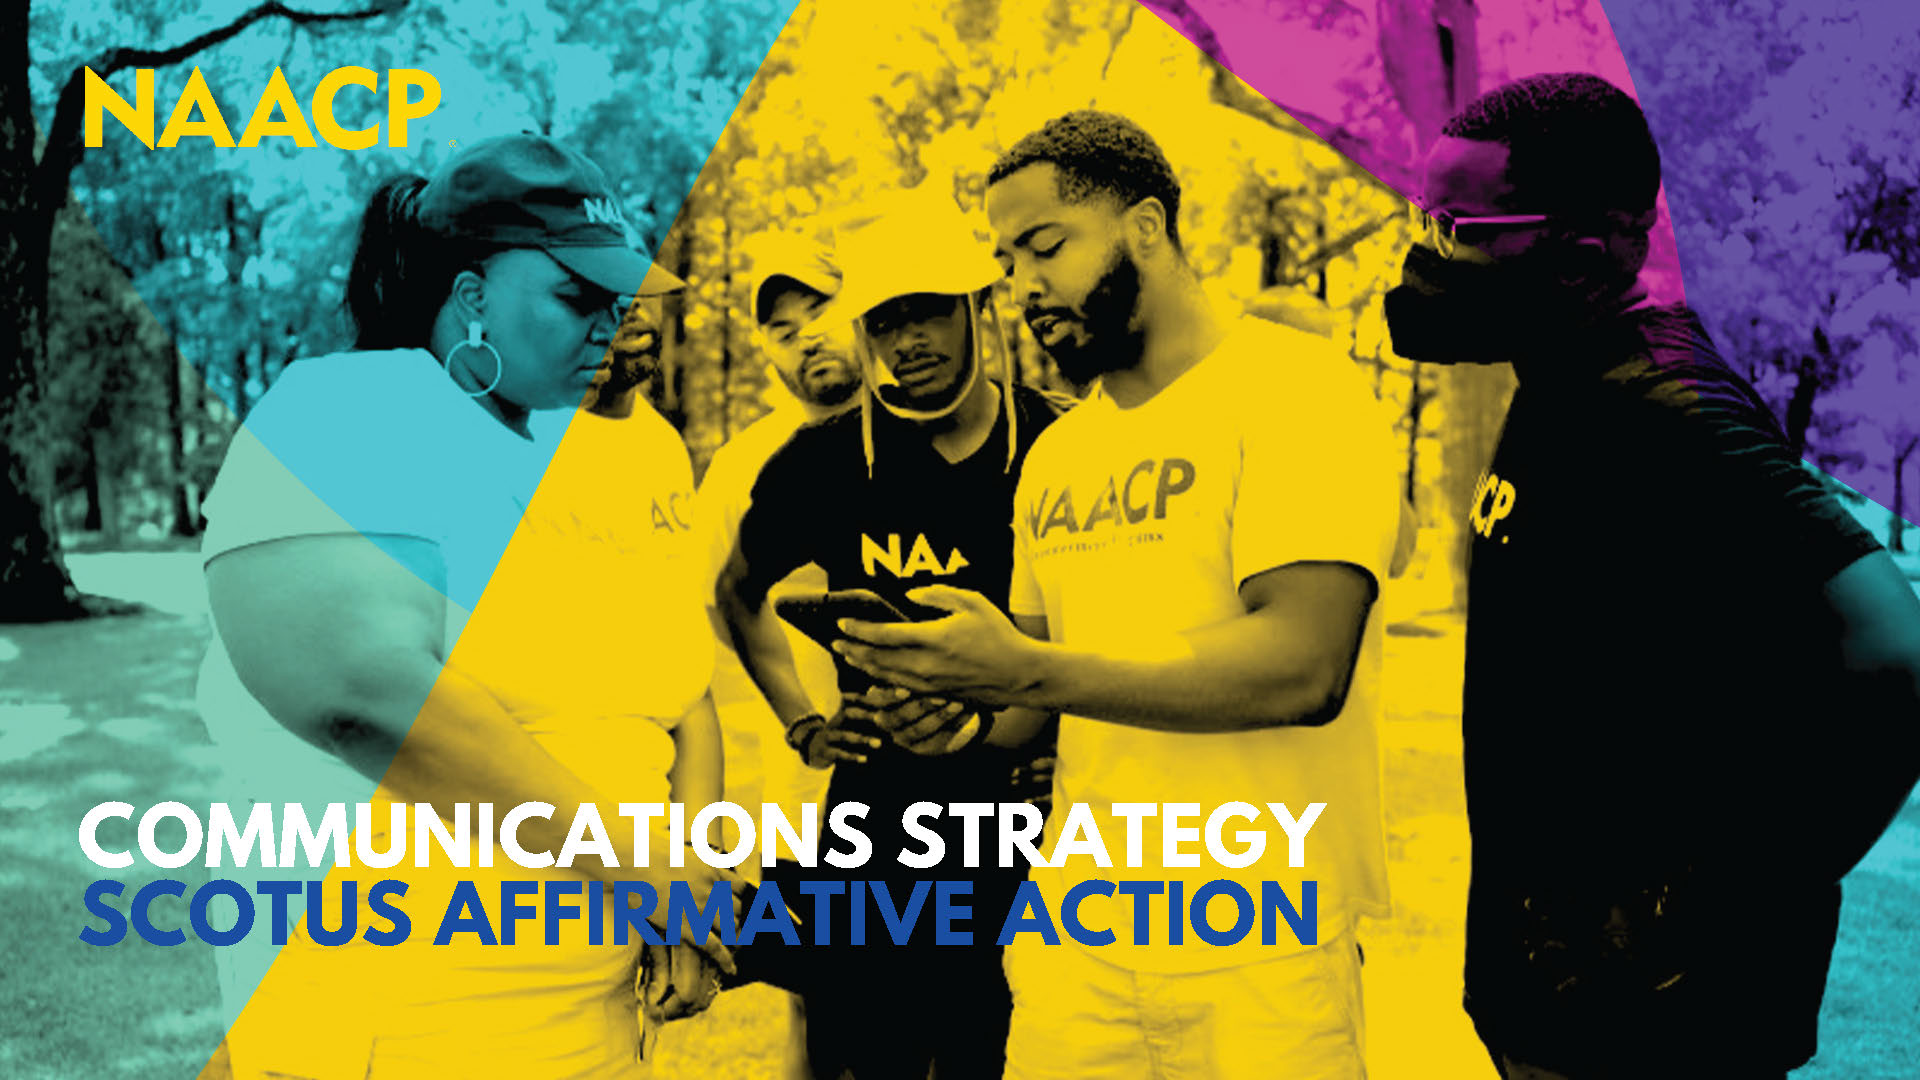 NAACP Communications Affirmative Action